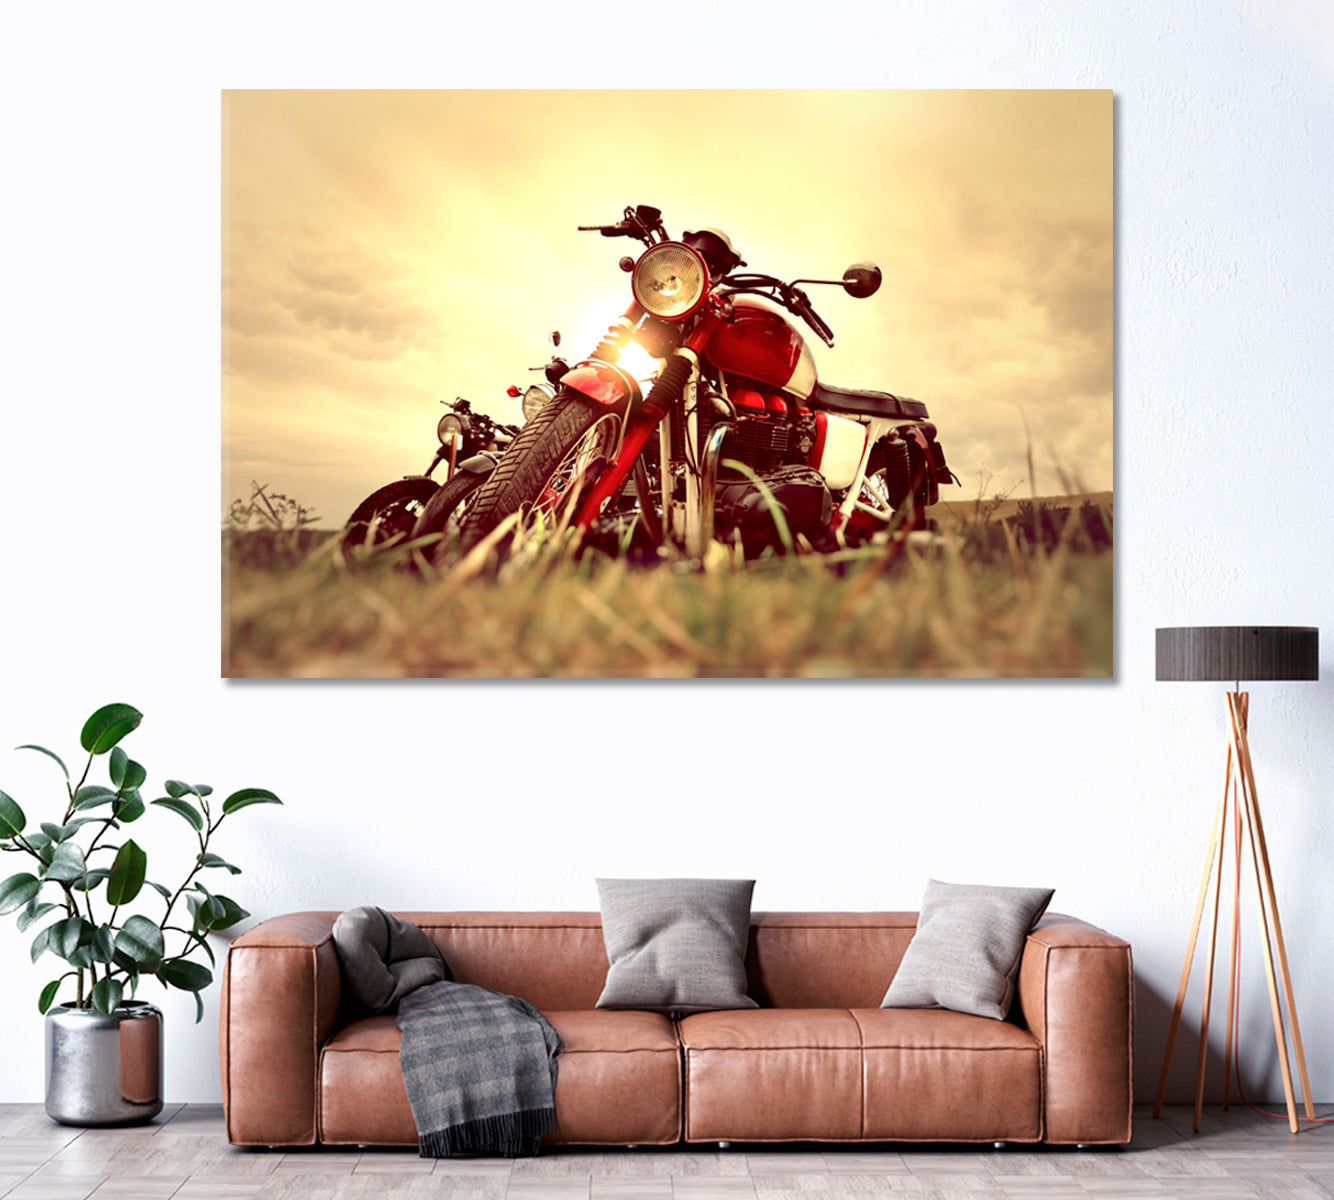 Vintage Motorcycles Parking on Grass Canvas Print ArtLexy 1 Panel 24"x16" inches 